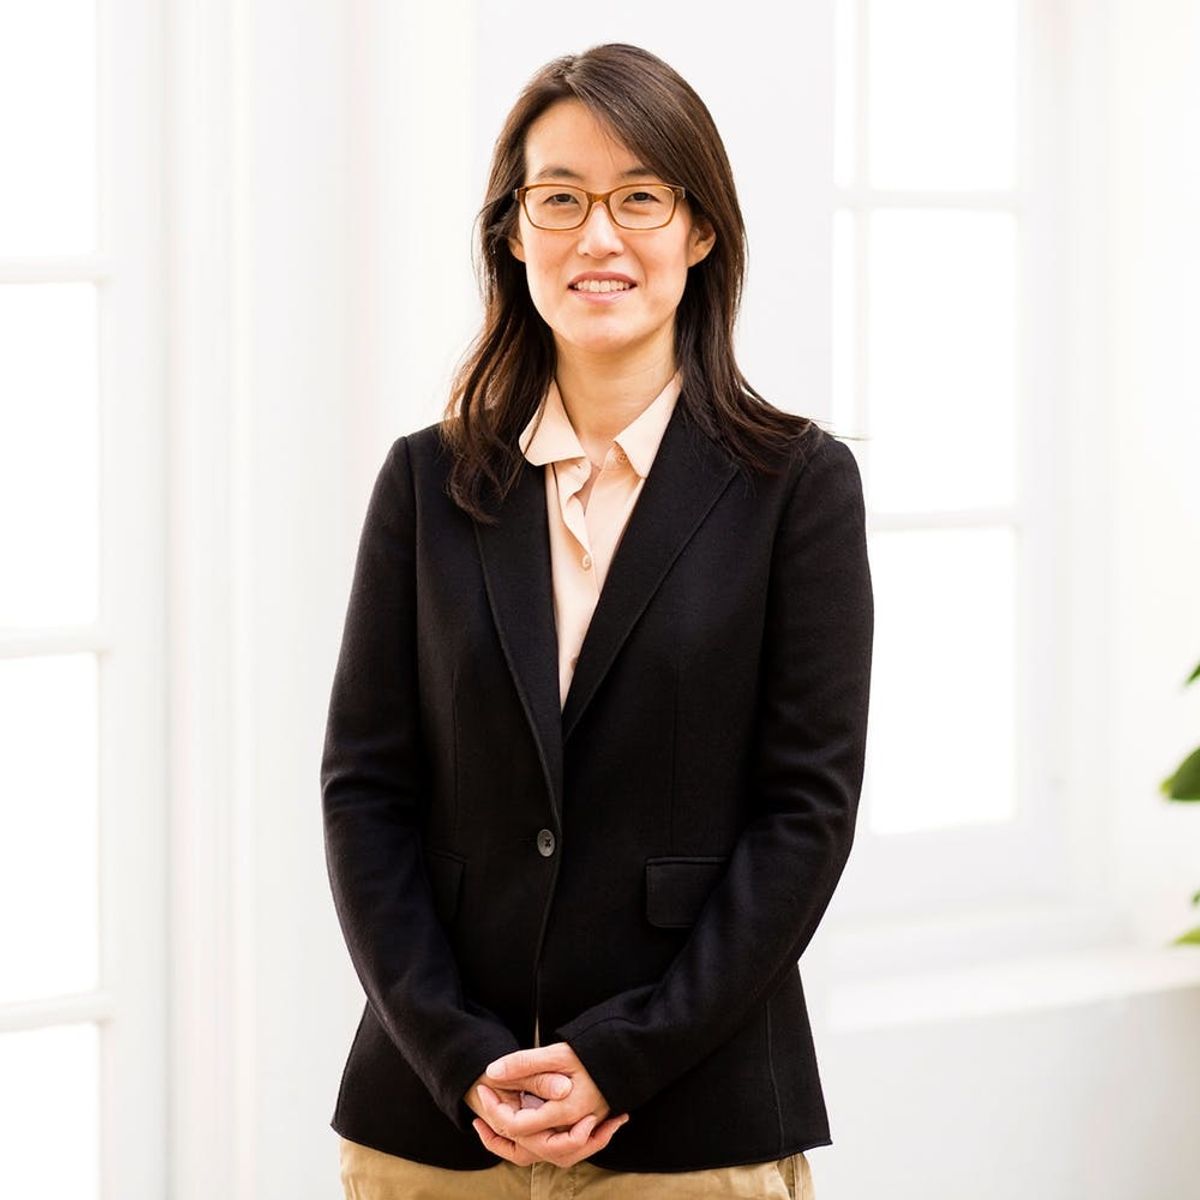 Ellen Pao Is Turning Tech Into a Woman’s World